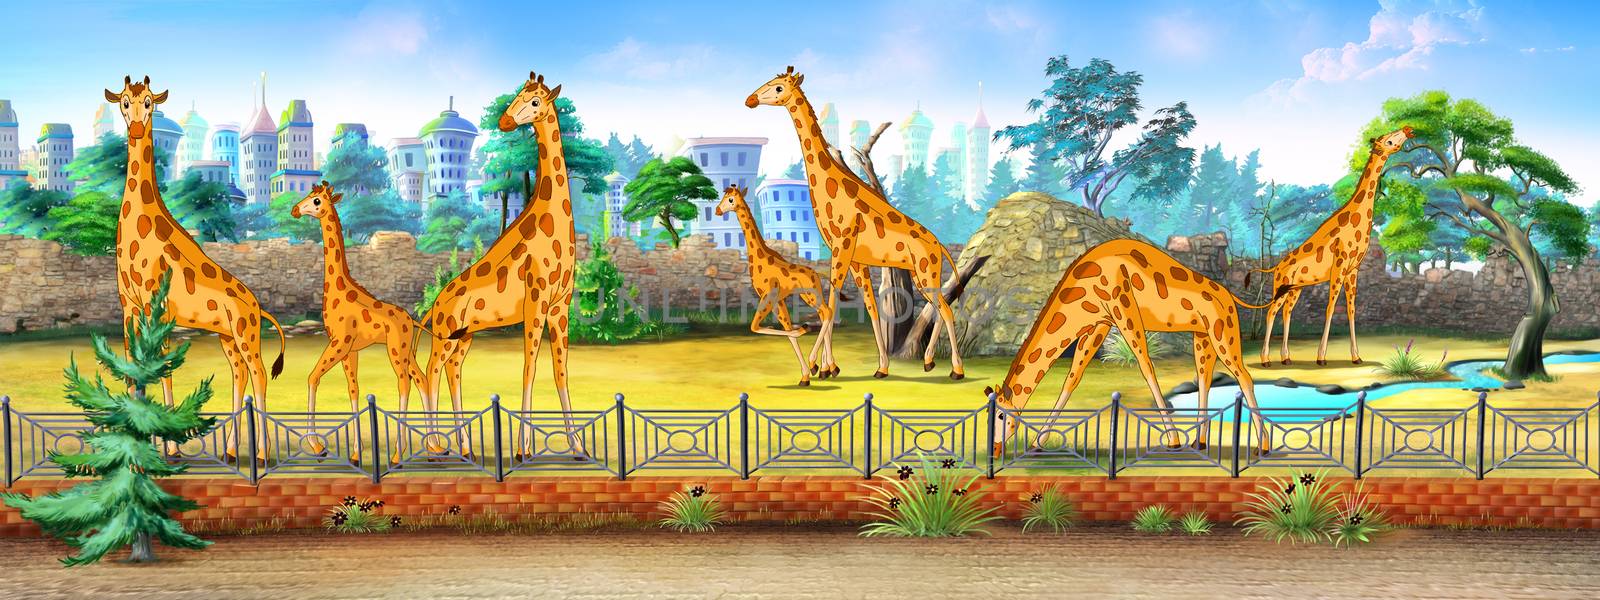 Giraffes waiting for a children at the Zoo.  Digital painting  cartoon style full color illustration.